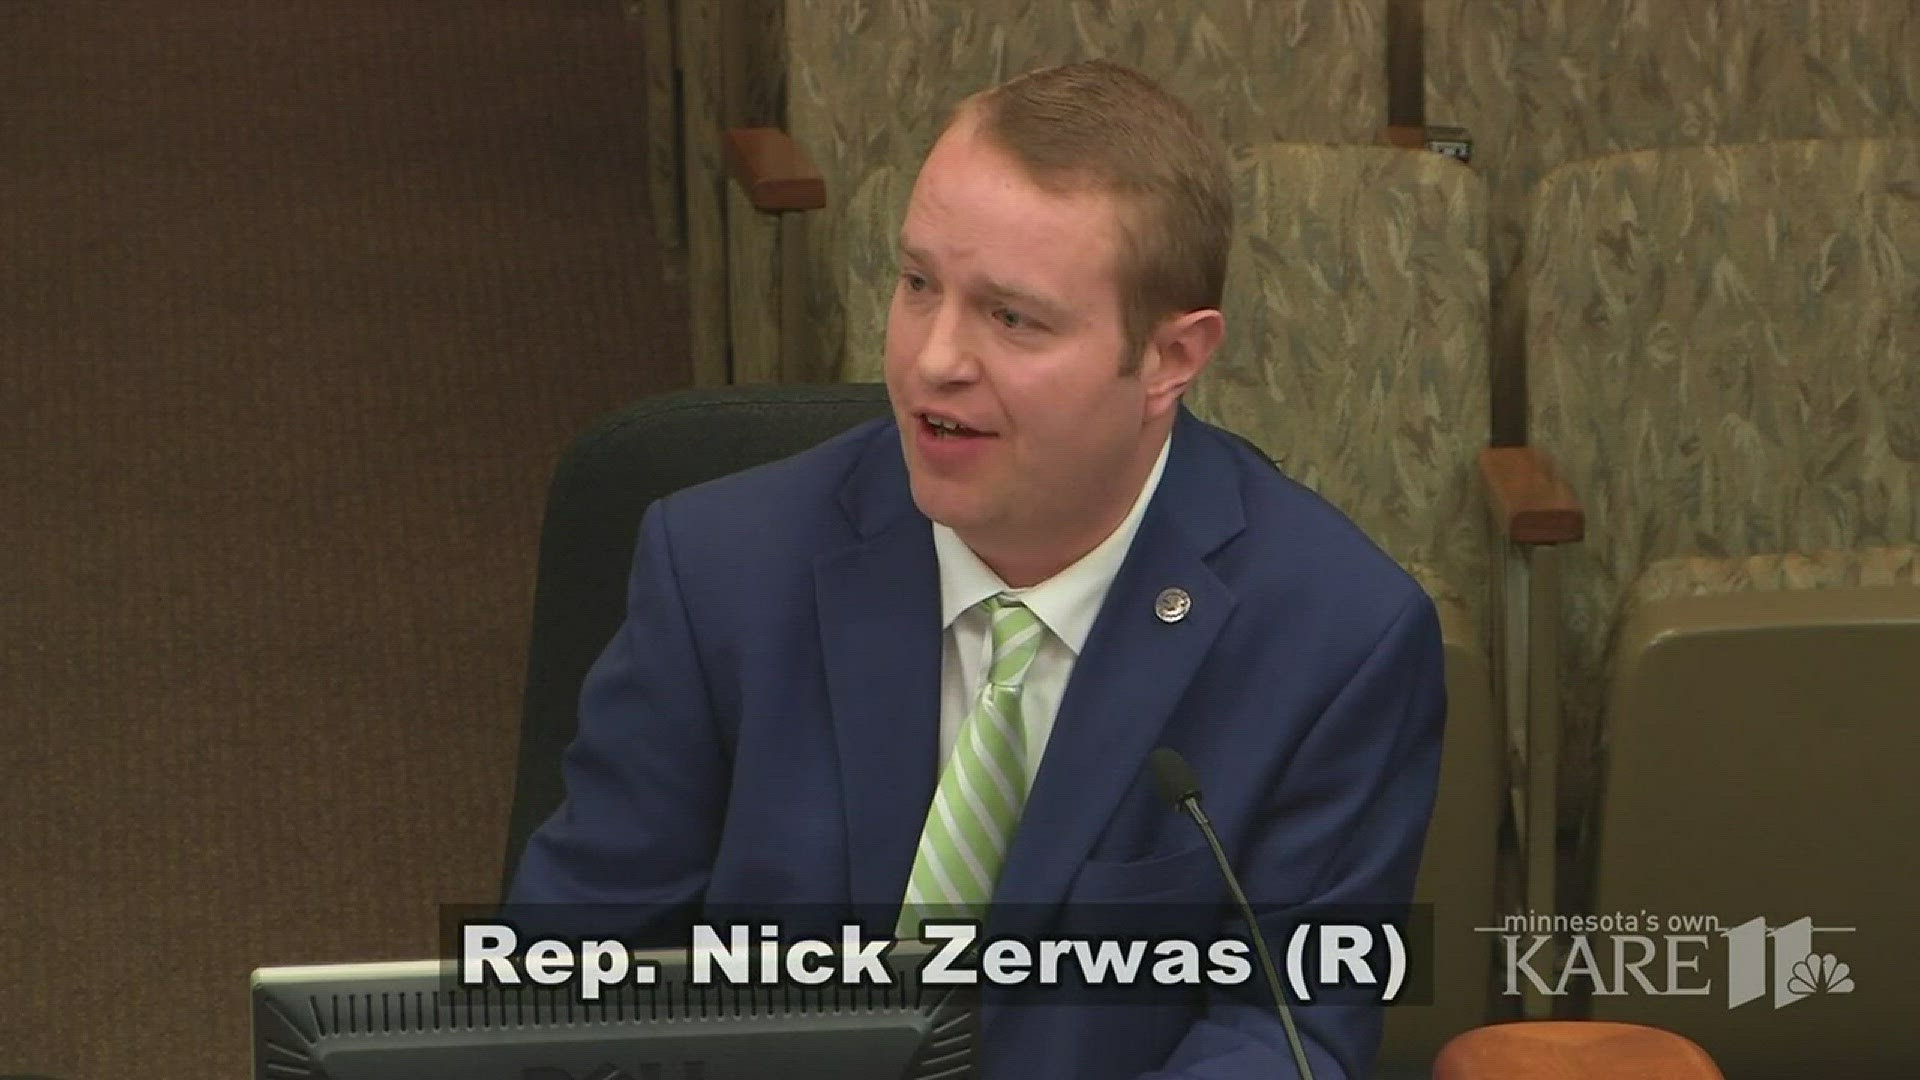 The House Public Safety Committee Thursday advanced a bill making it a gross misdemeanor for protesters to block highways, railways and airports. Here's an excerpt of the exchange between Rep. Nick Zerwas, the author of the bill, and Rep. Ray Dehn.